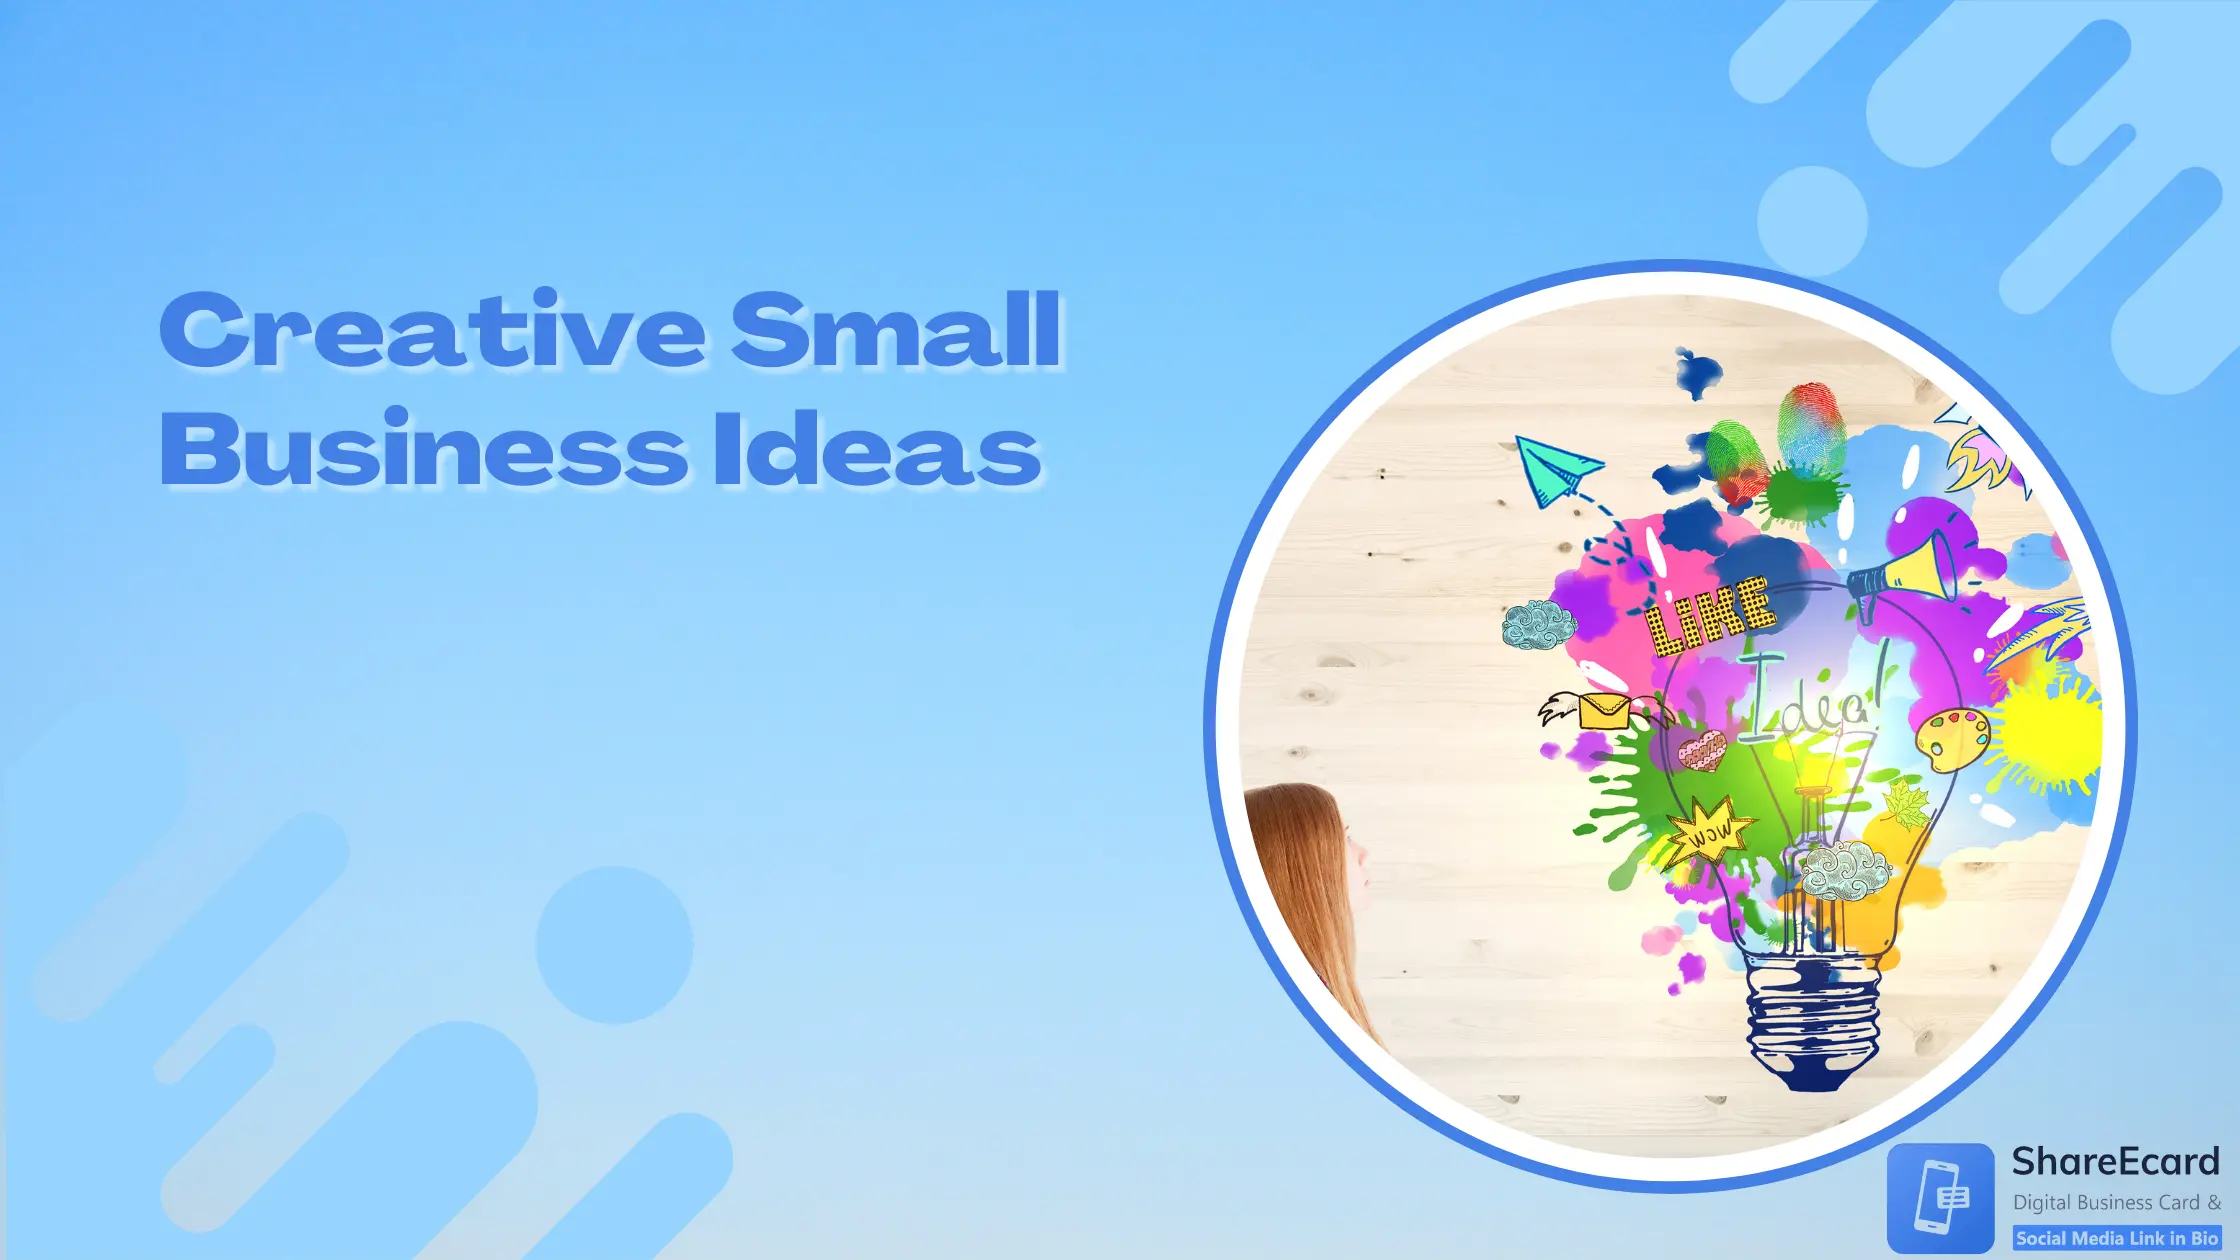 List of Top 10 Creative Small Business Ideas